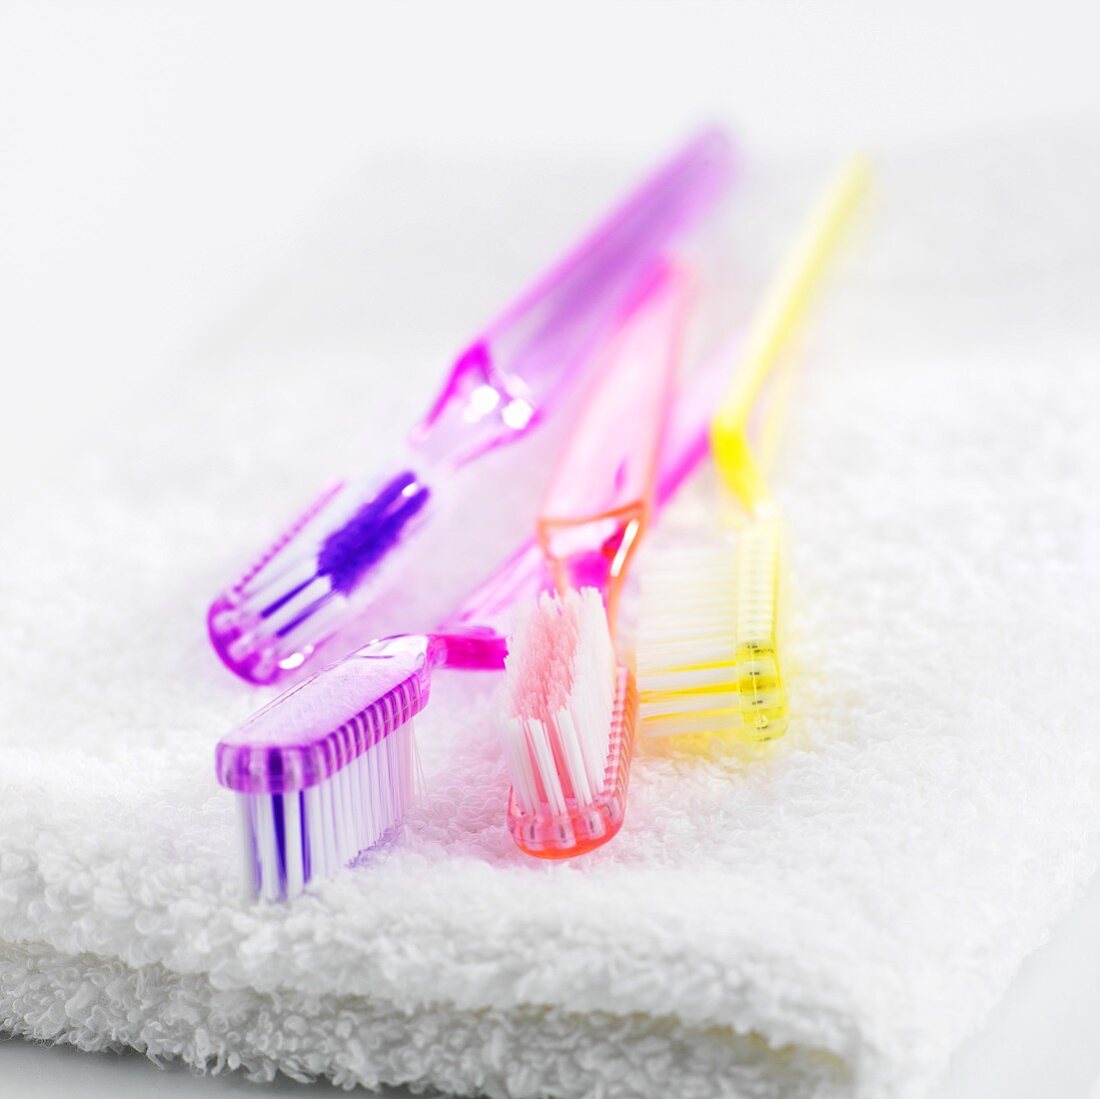 Toothbrushes on towel